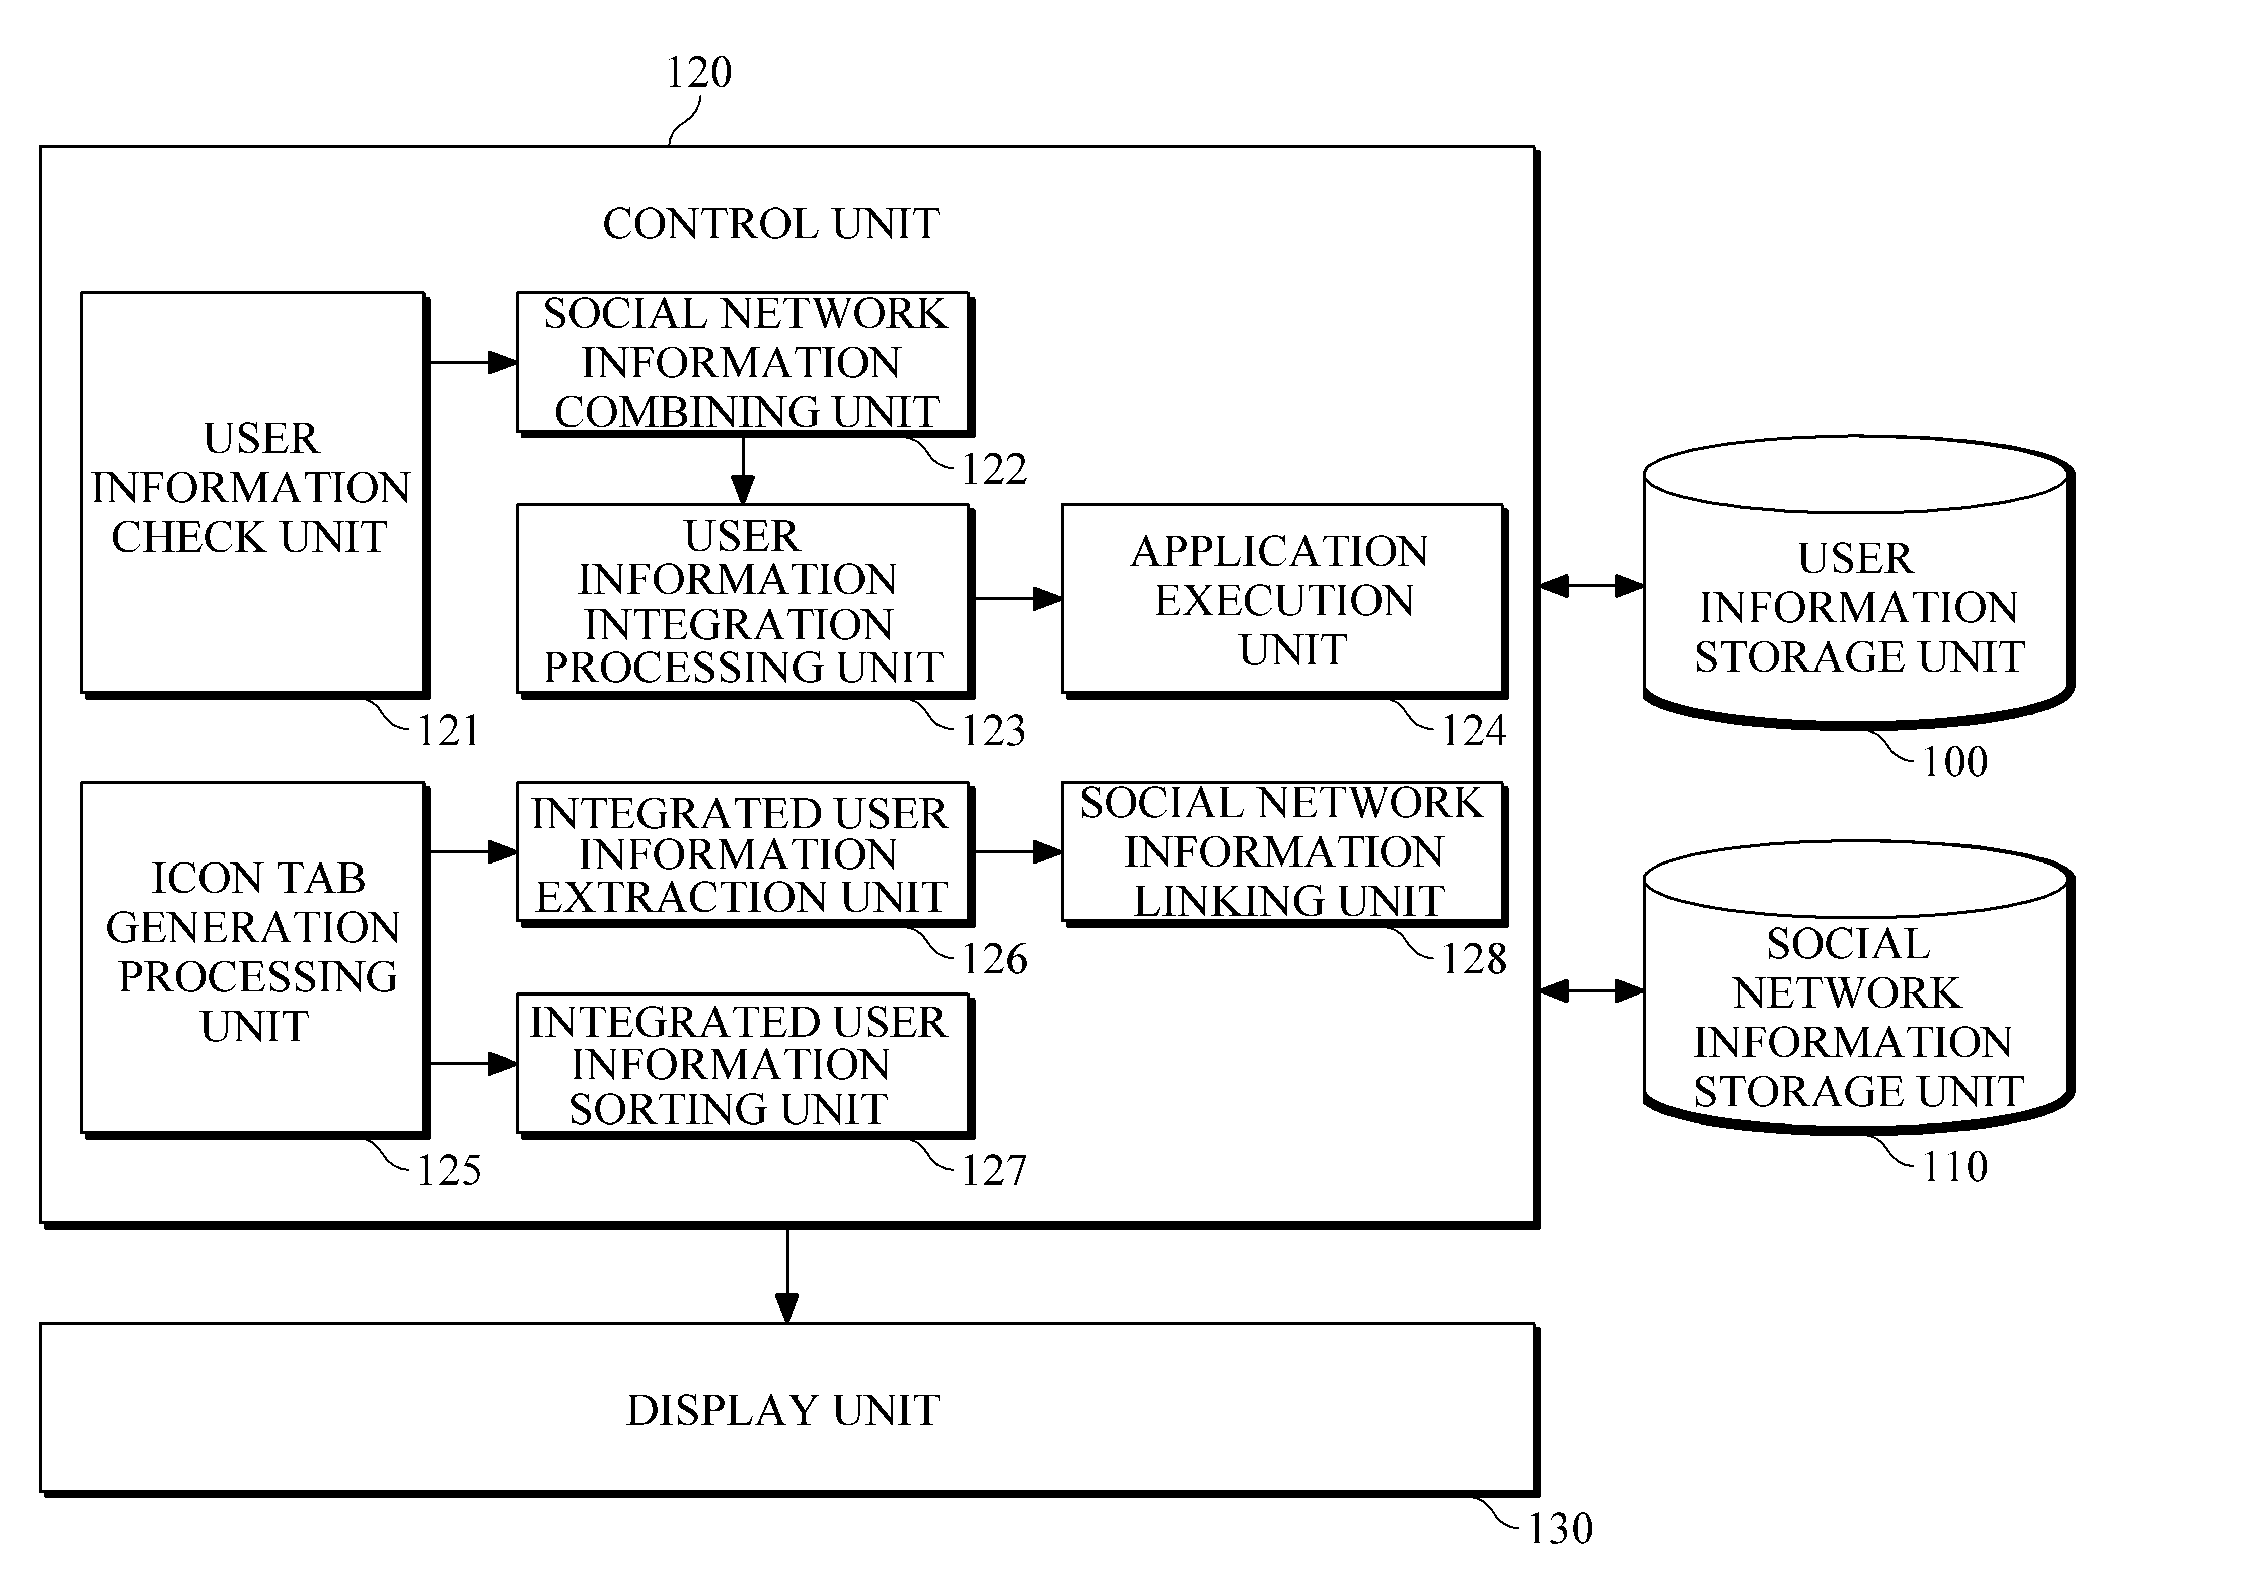 Apparatus and method for providing integrated user information